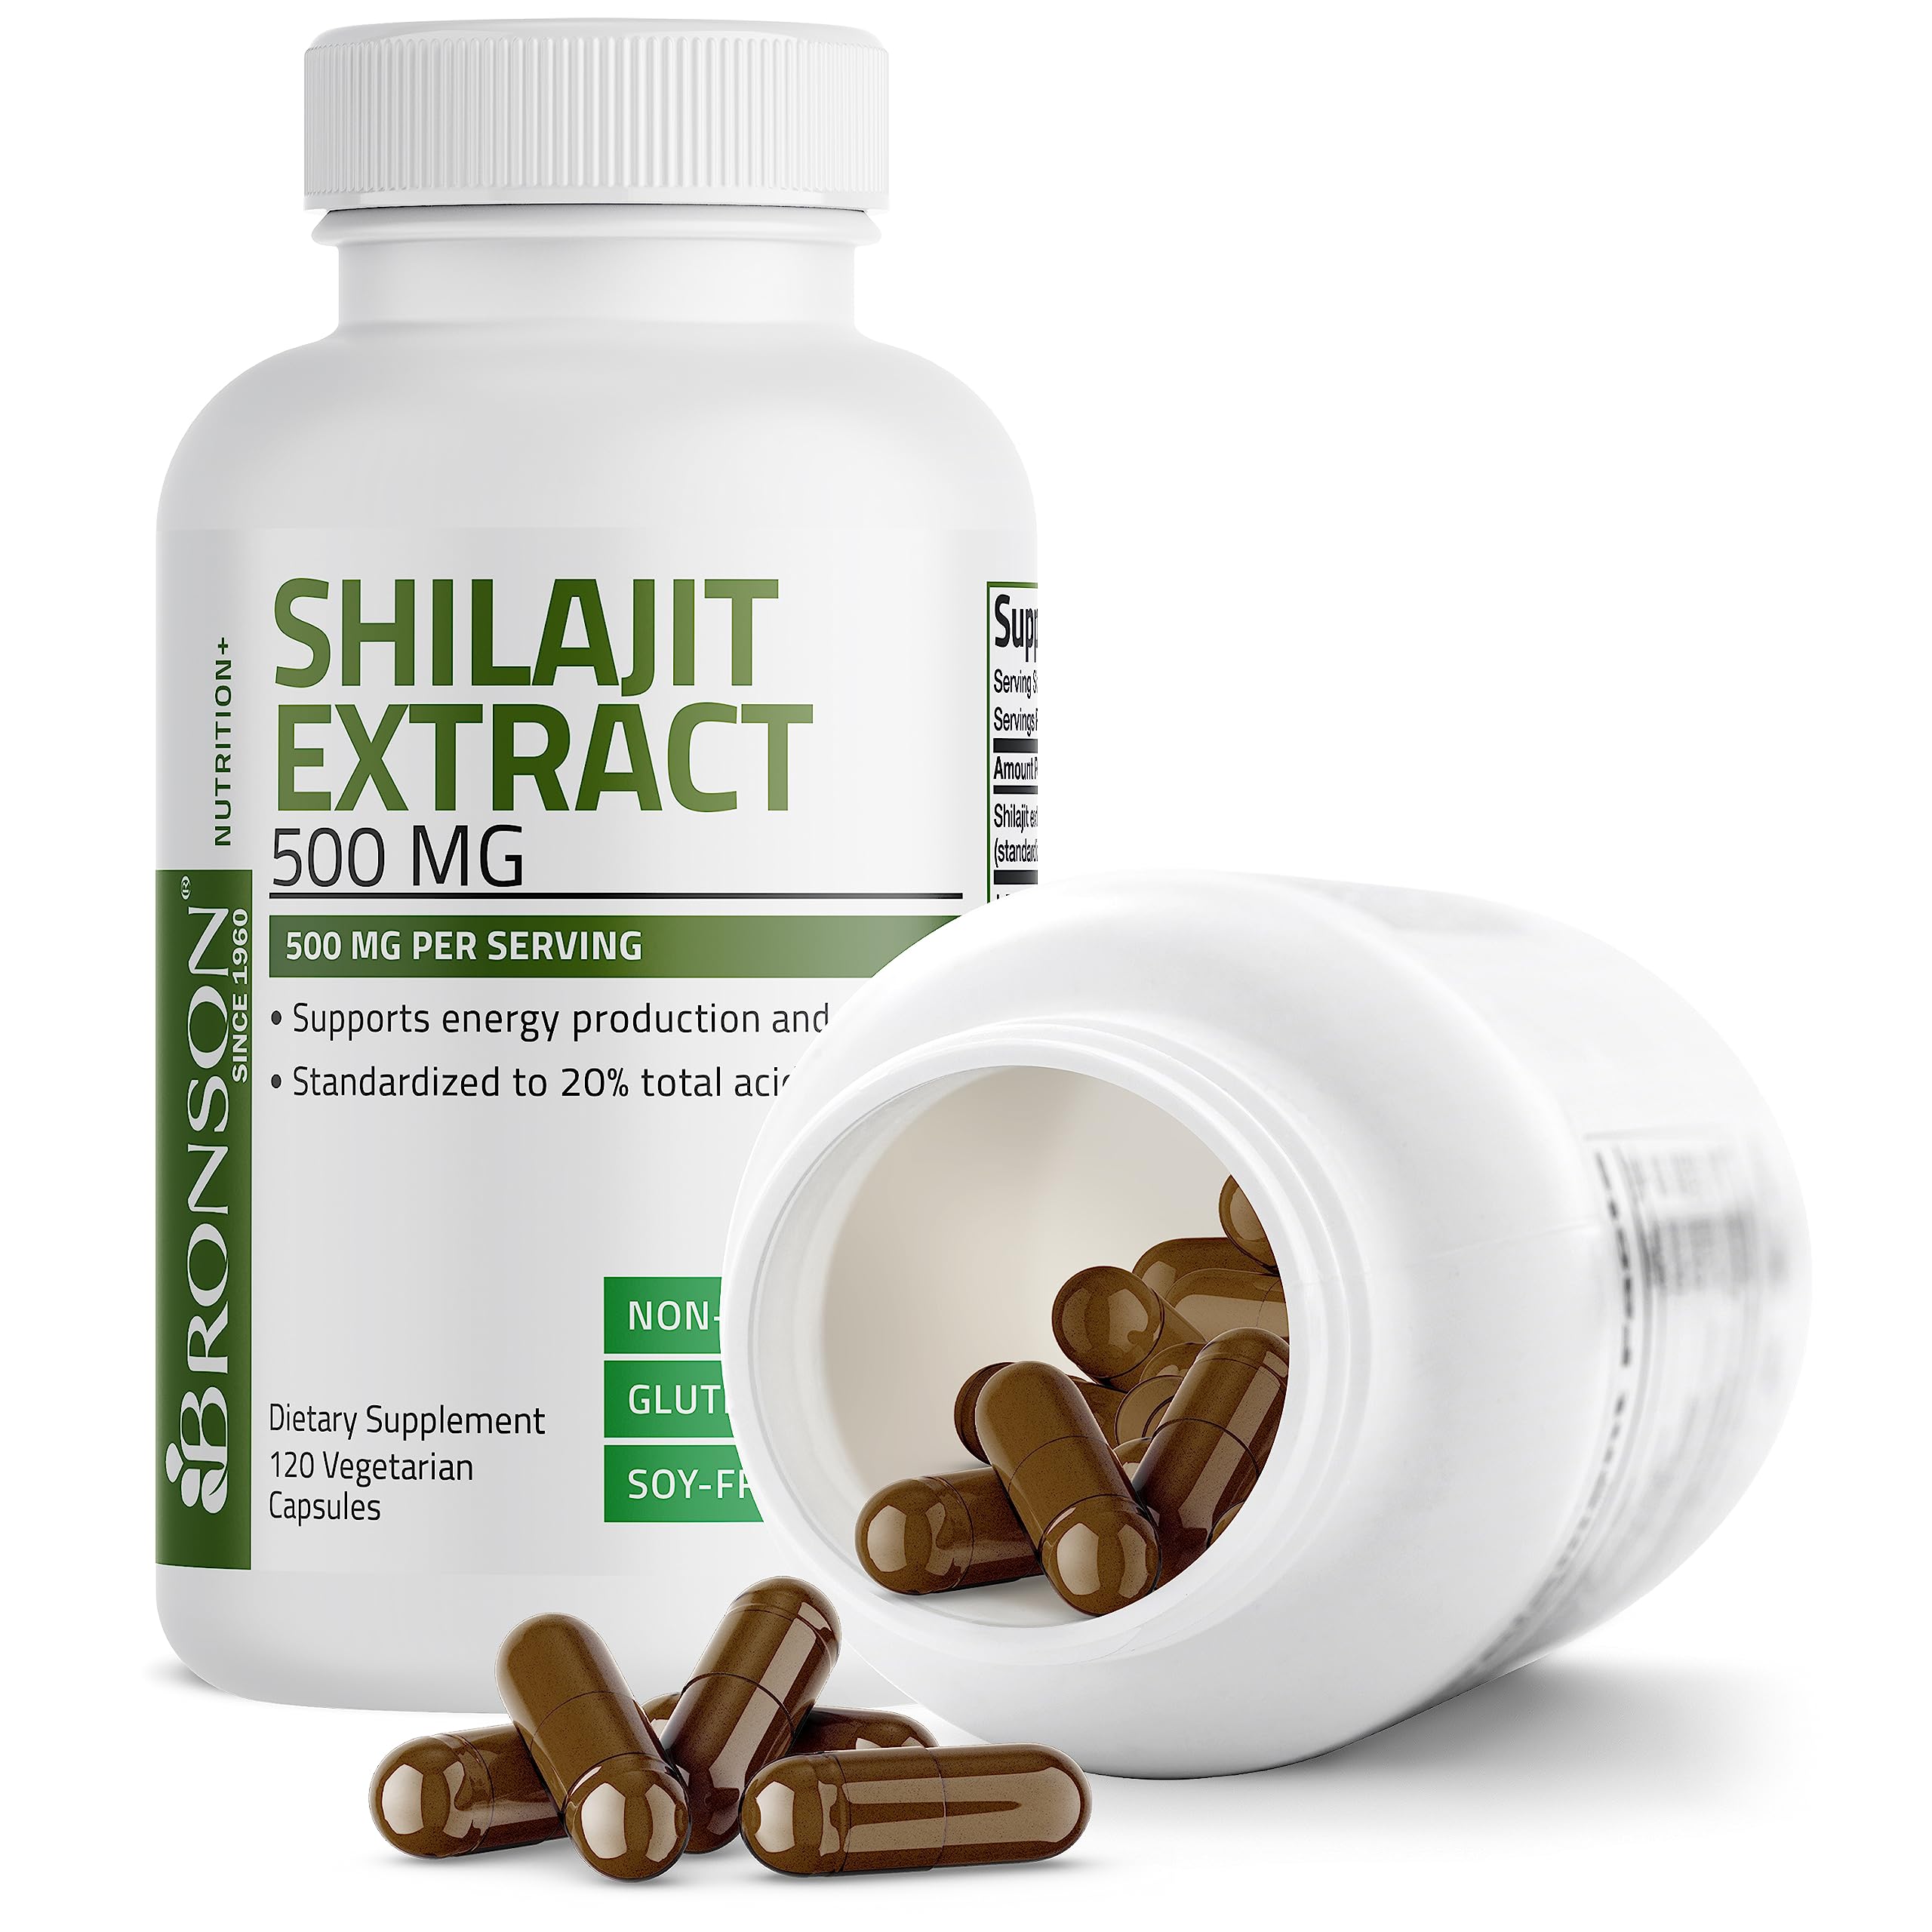 Shilajit Extract - 500 mg view 3 of 6